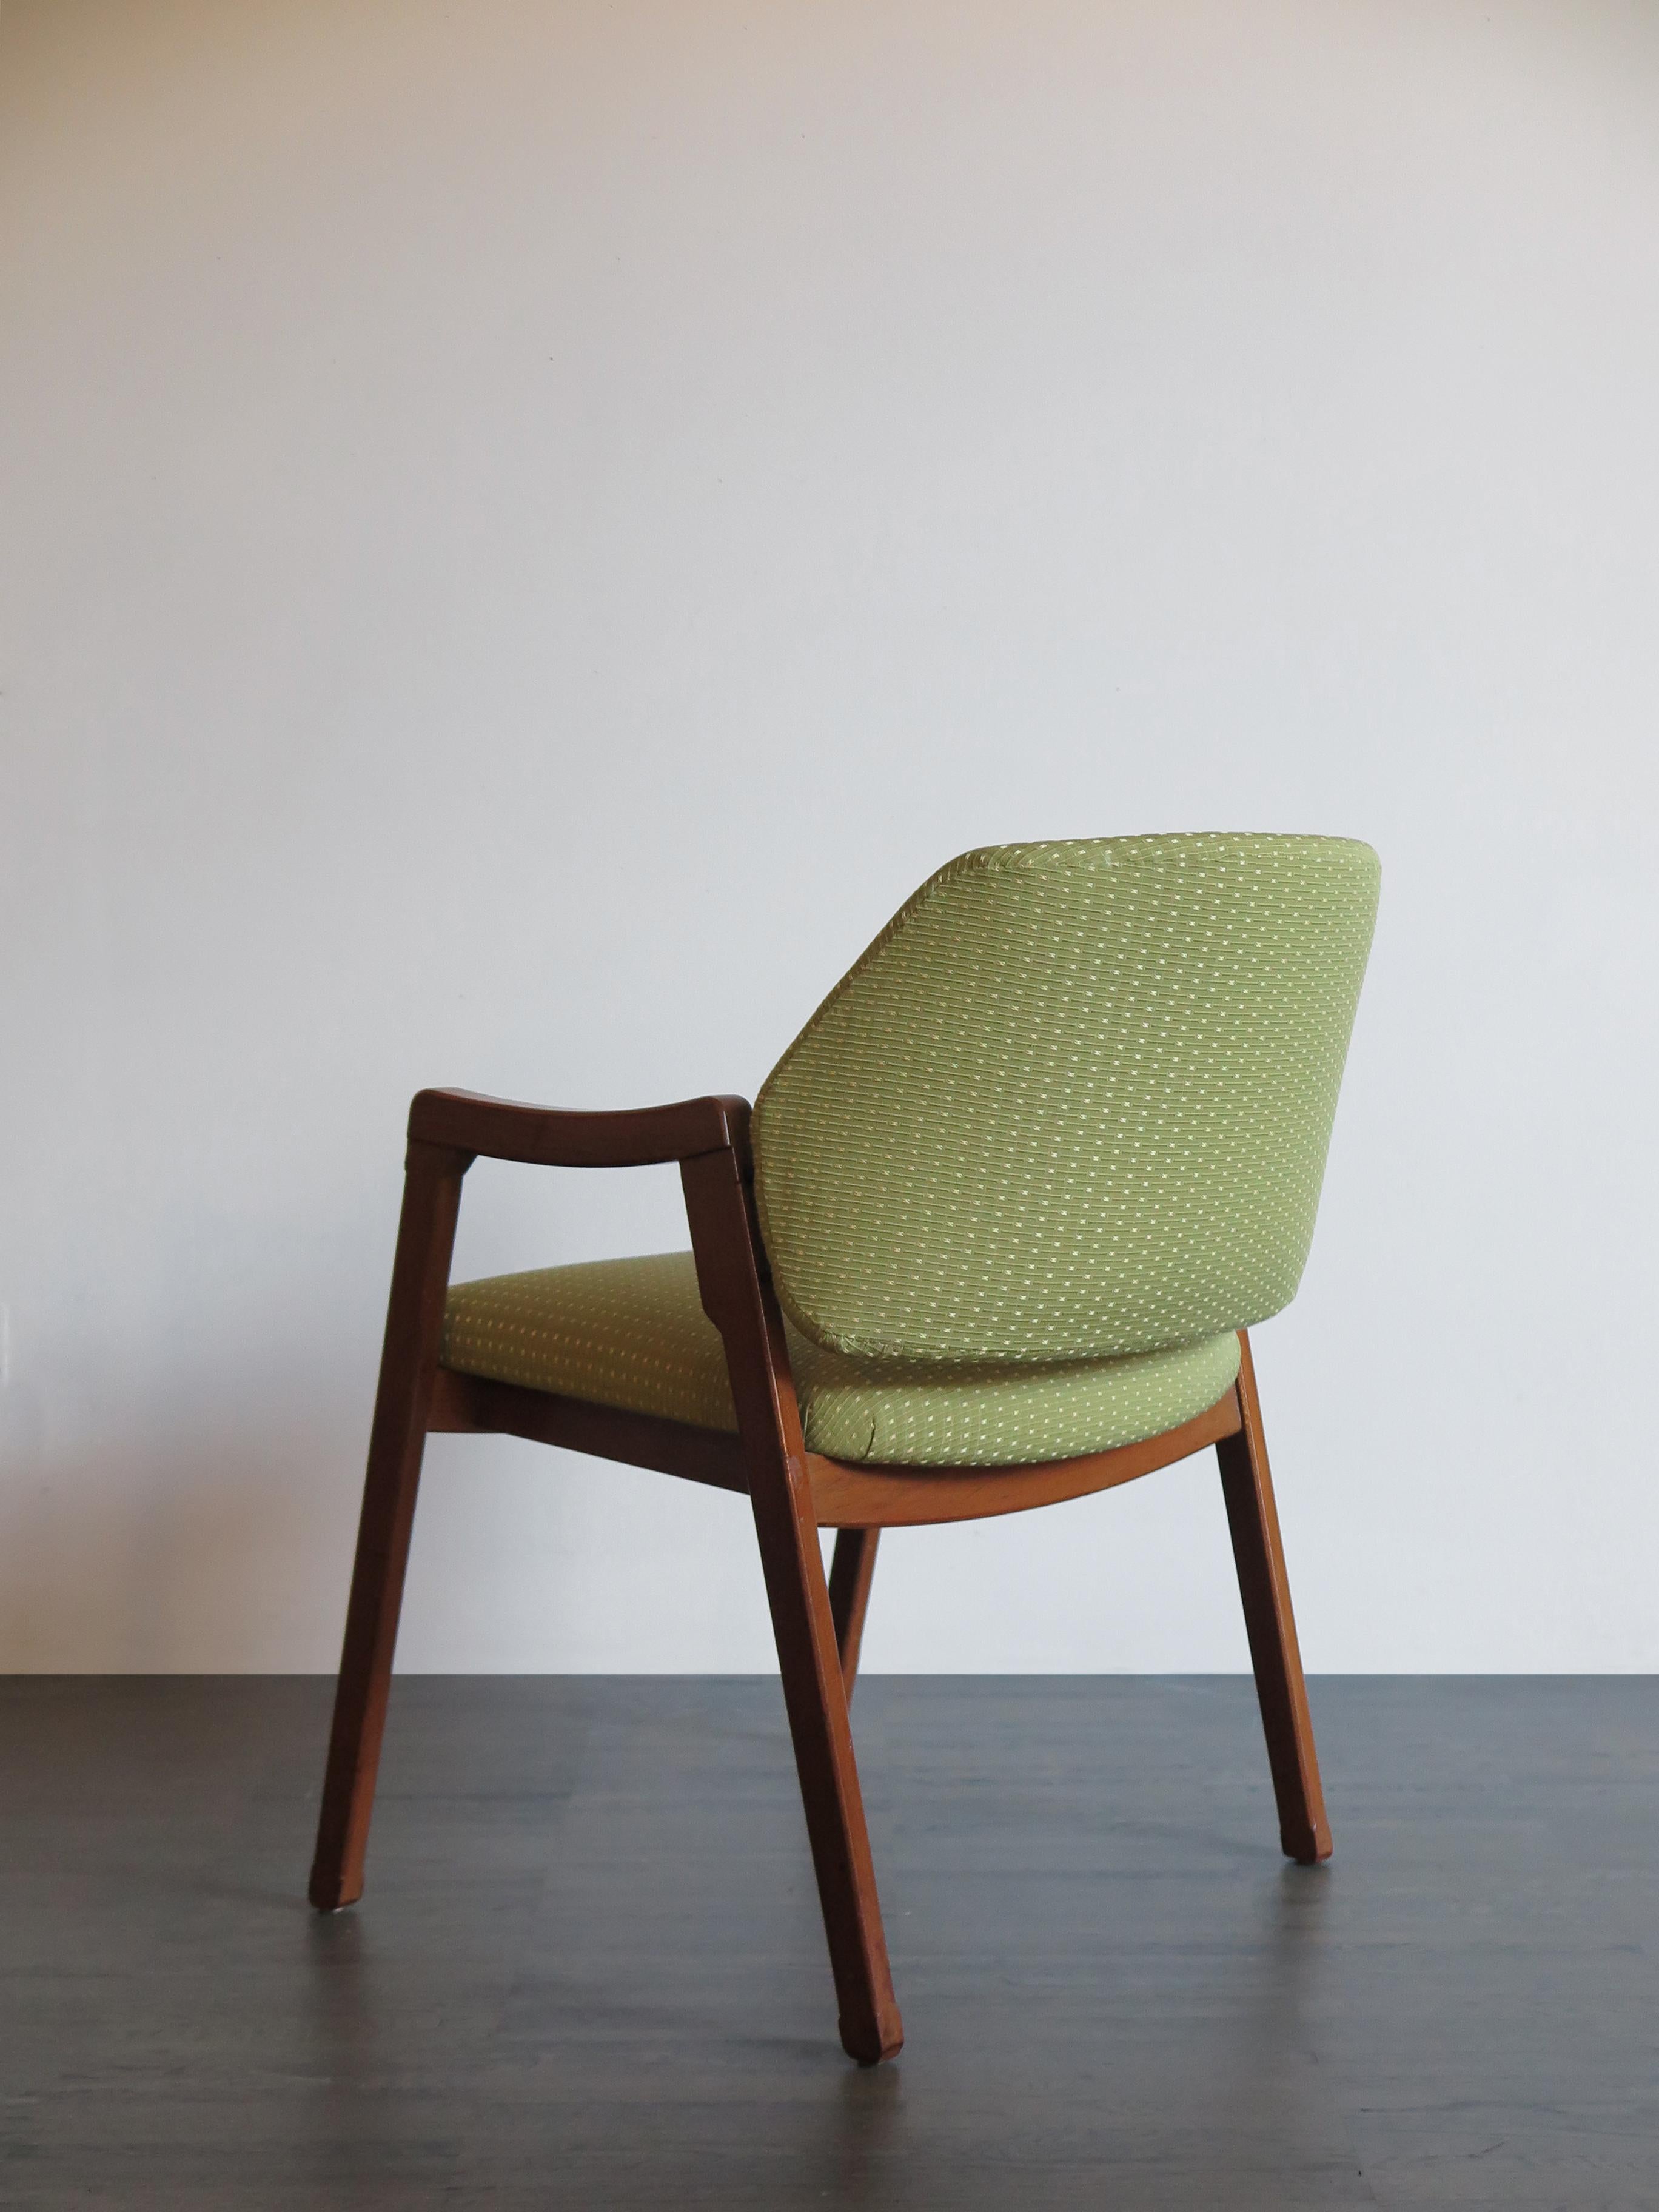 Mid-20th Century Ico Parisi Italian Fabric and Wood Armchair Model 814 for Cassina, 1960s